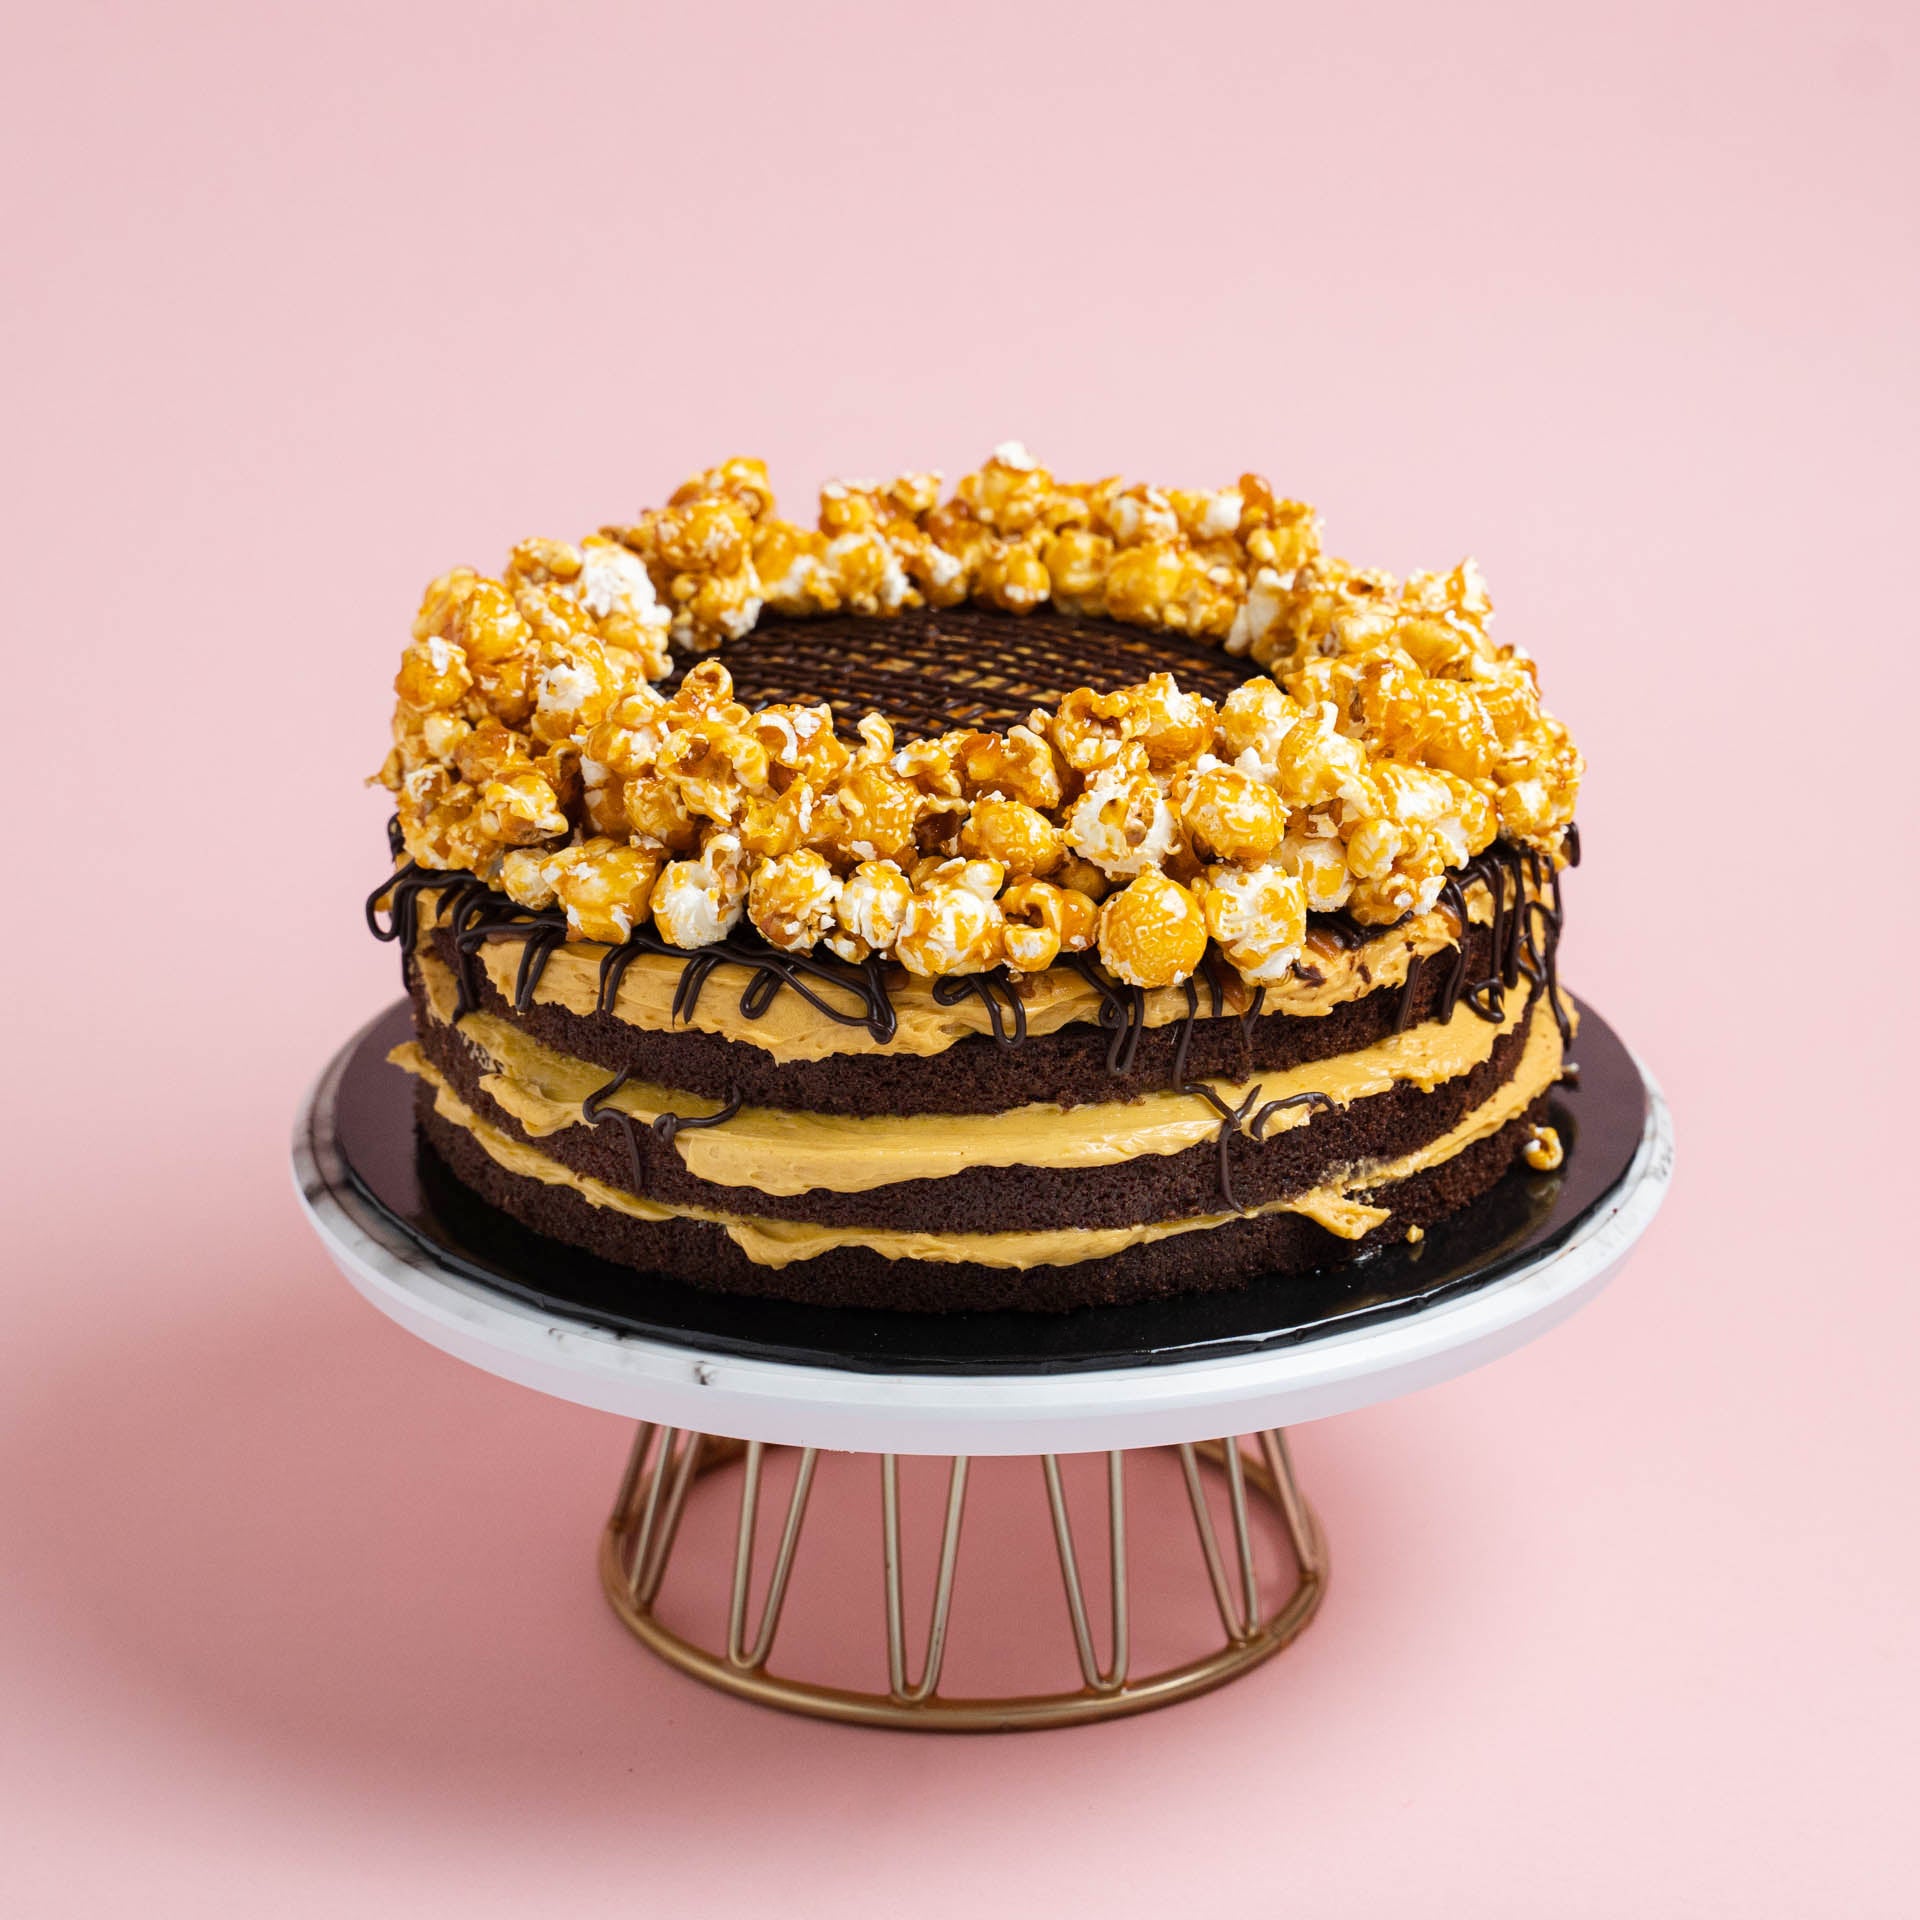 30 Degrees angle View of Salted Caramel Chocolate 9 Inch Cake with Popcorns on Top by Elevete Patisserie